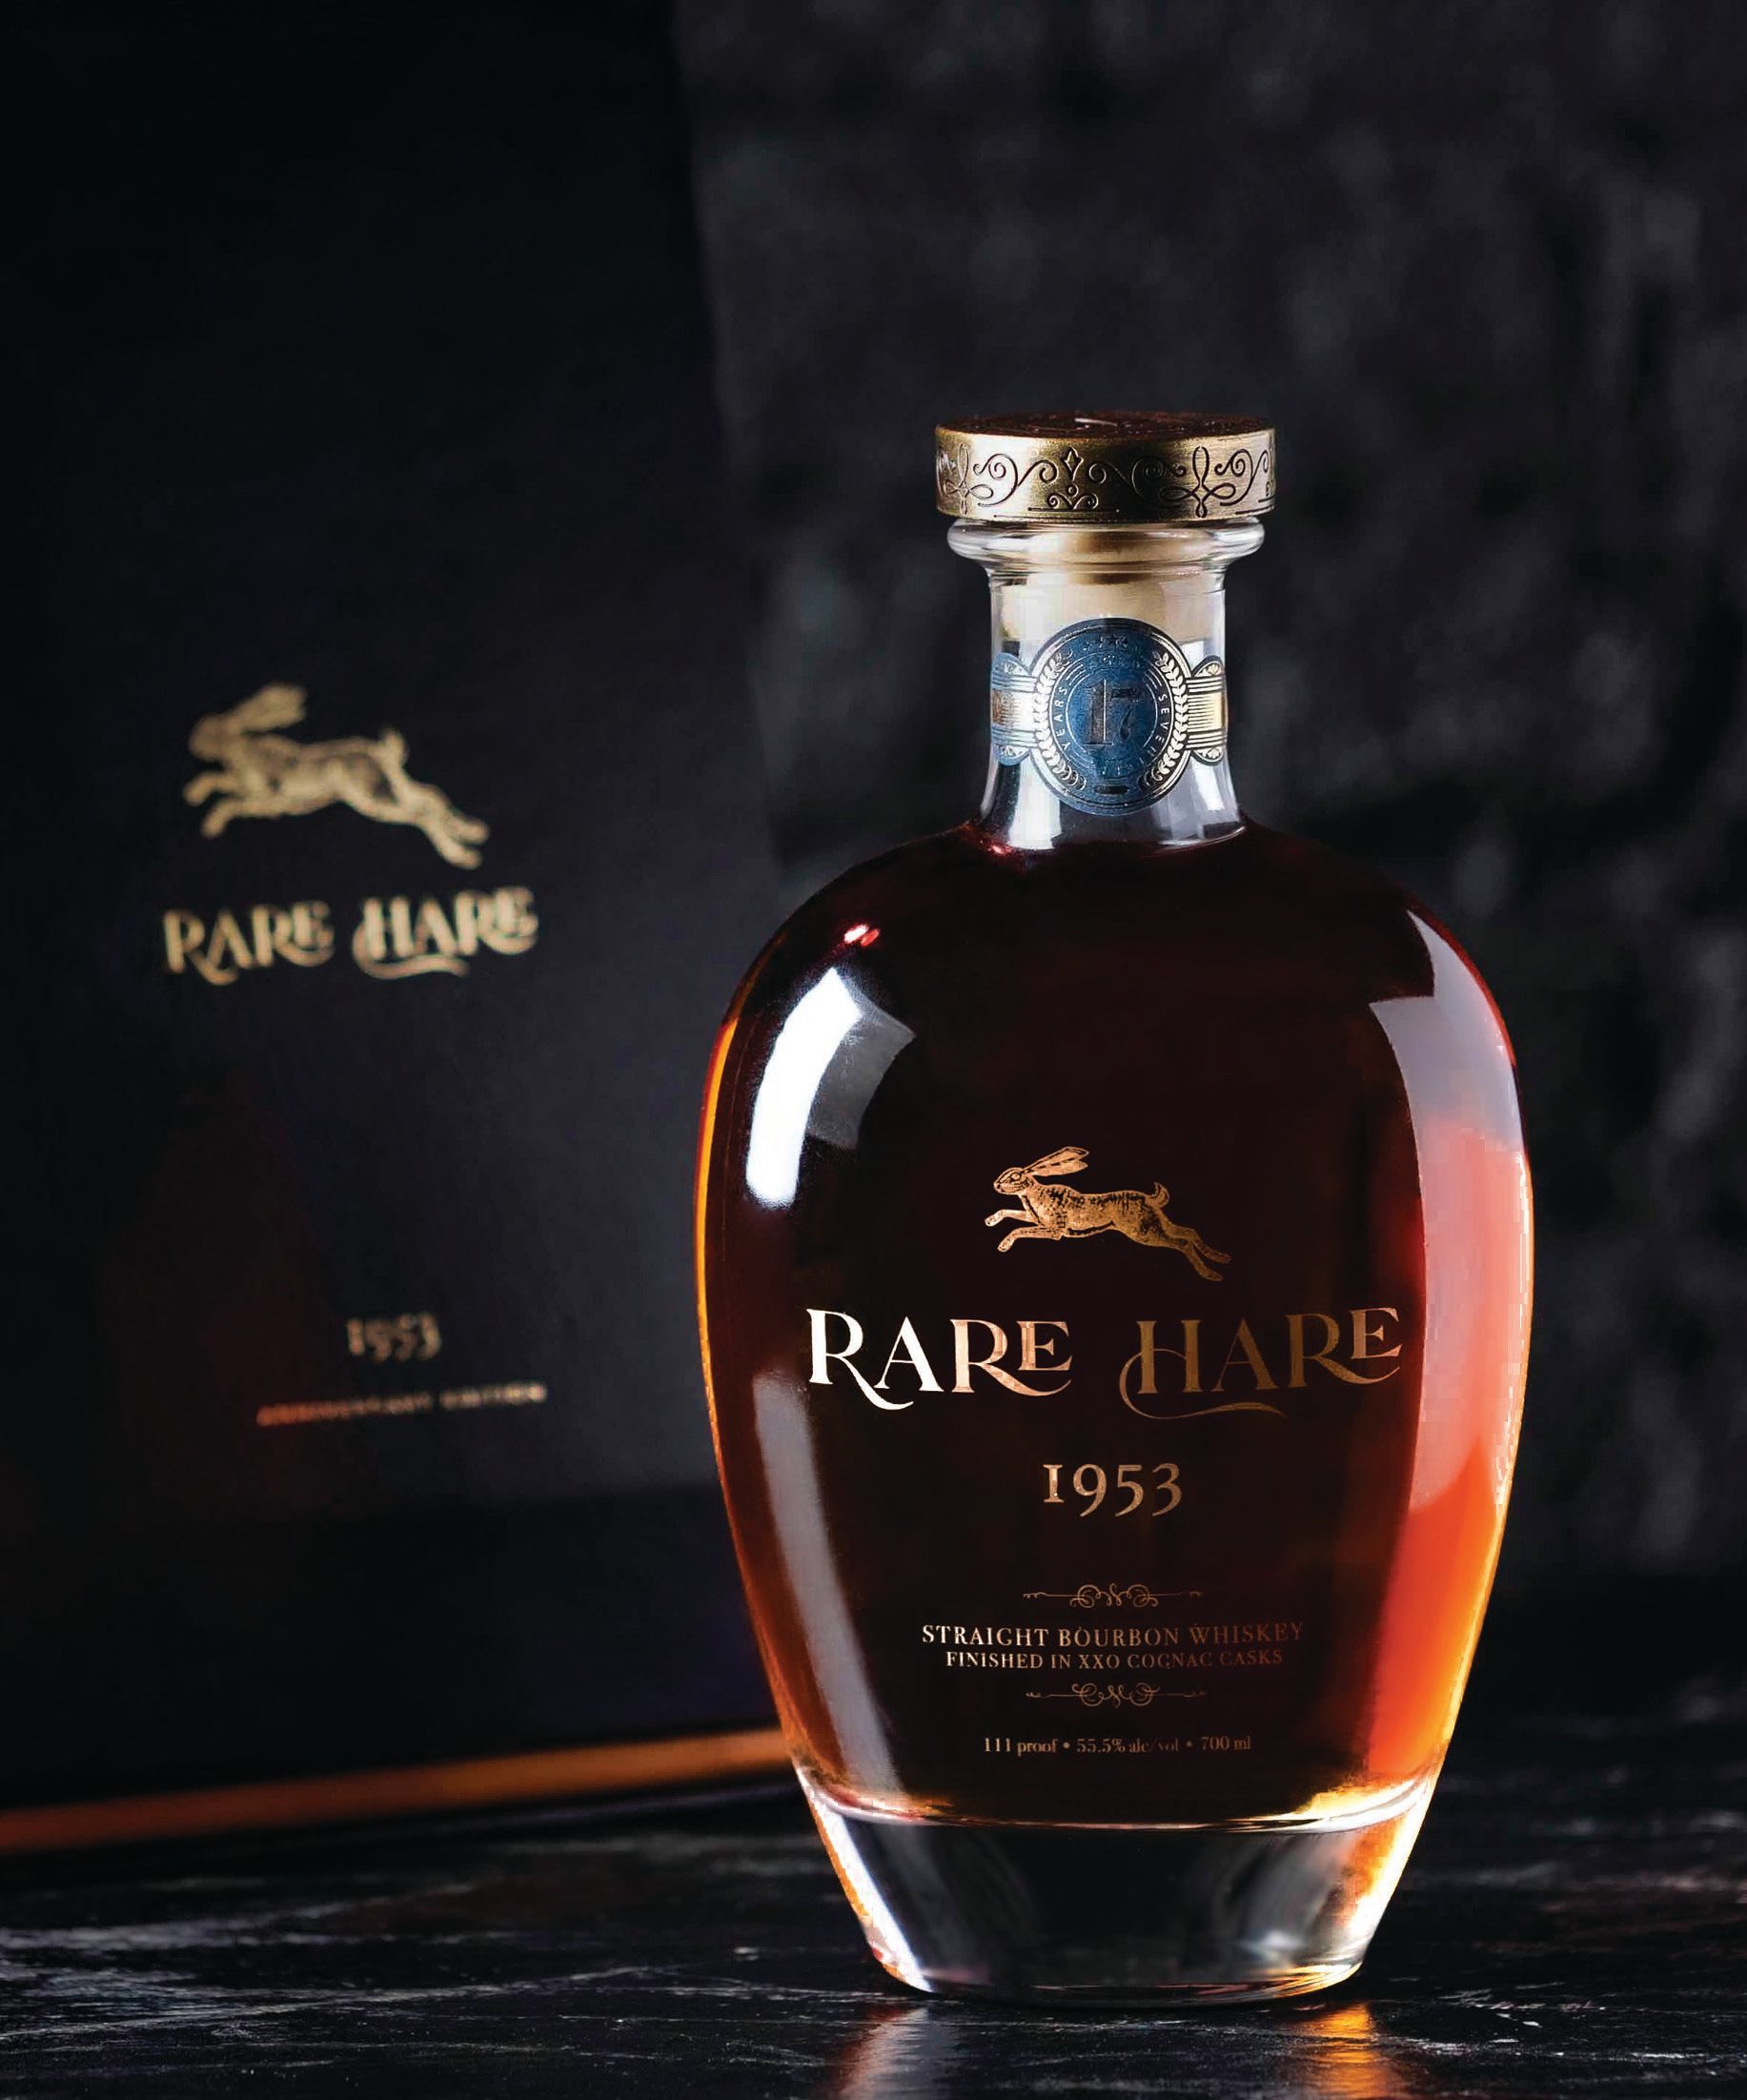 Rare Hare 1953 is aged 17 years and finished in XXO cognac casks. PHOTO COURTESY OF RARE HARE